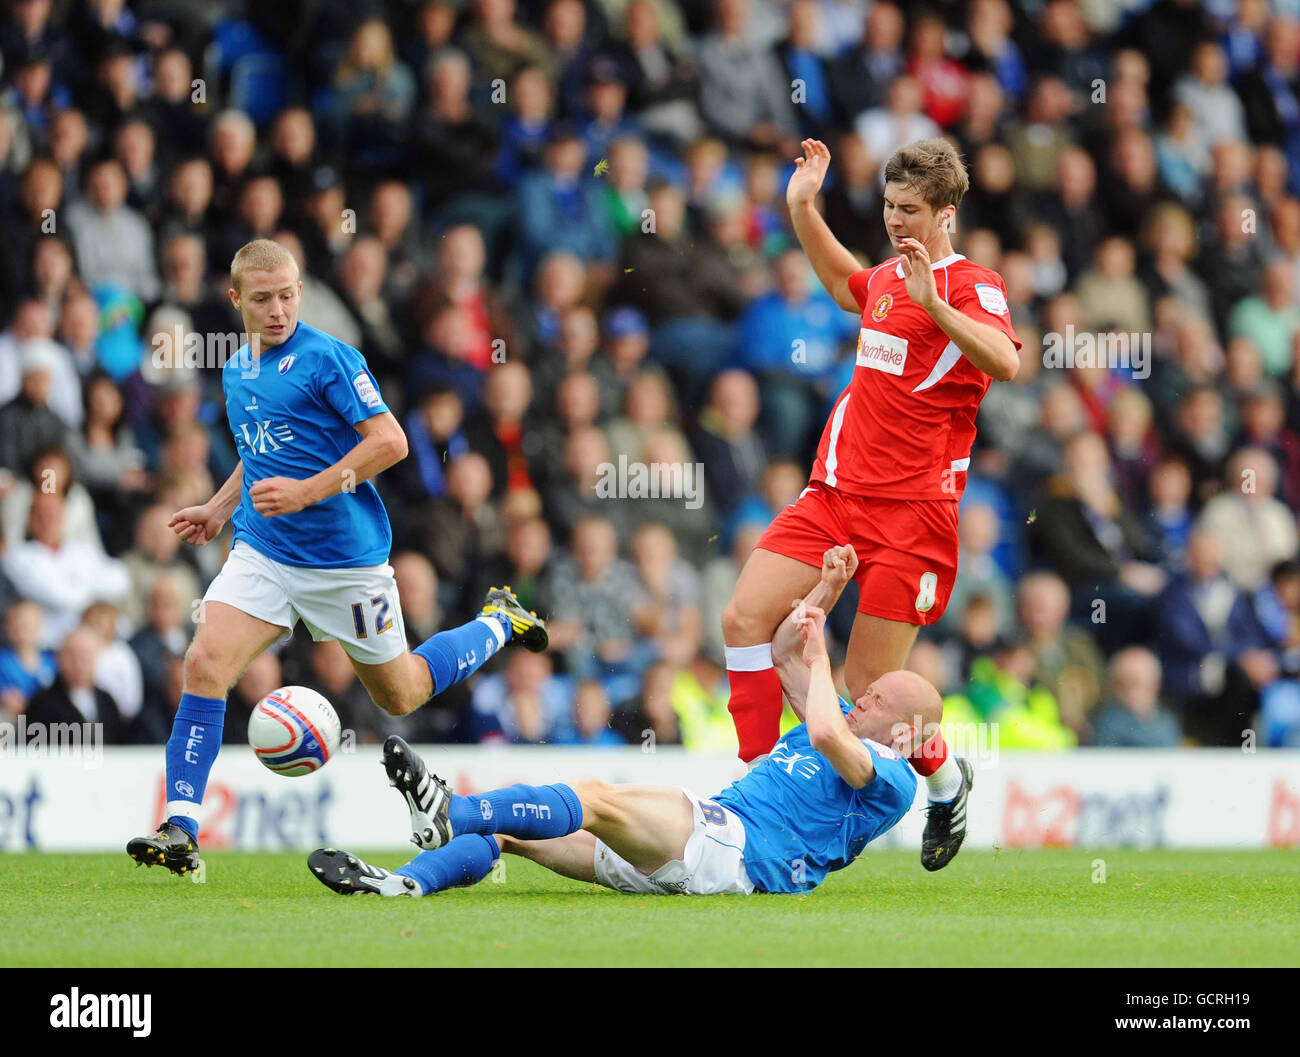 Chesterfield's Derek Niven (ground) battles for the ball with Crewe's Luke Murphy during the npower League Two match at the B2net Stadium, Chesterfield. Stock Photo